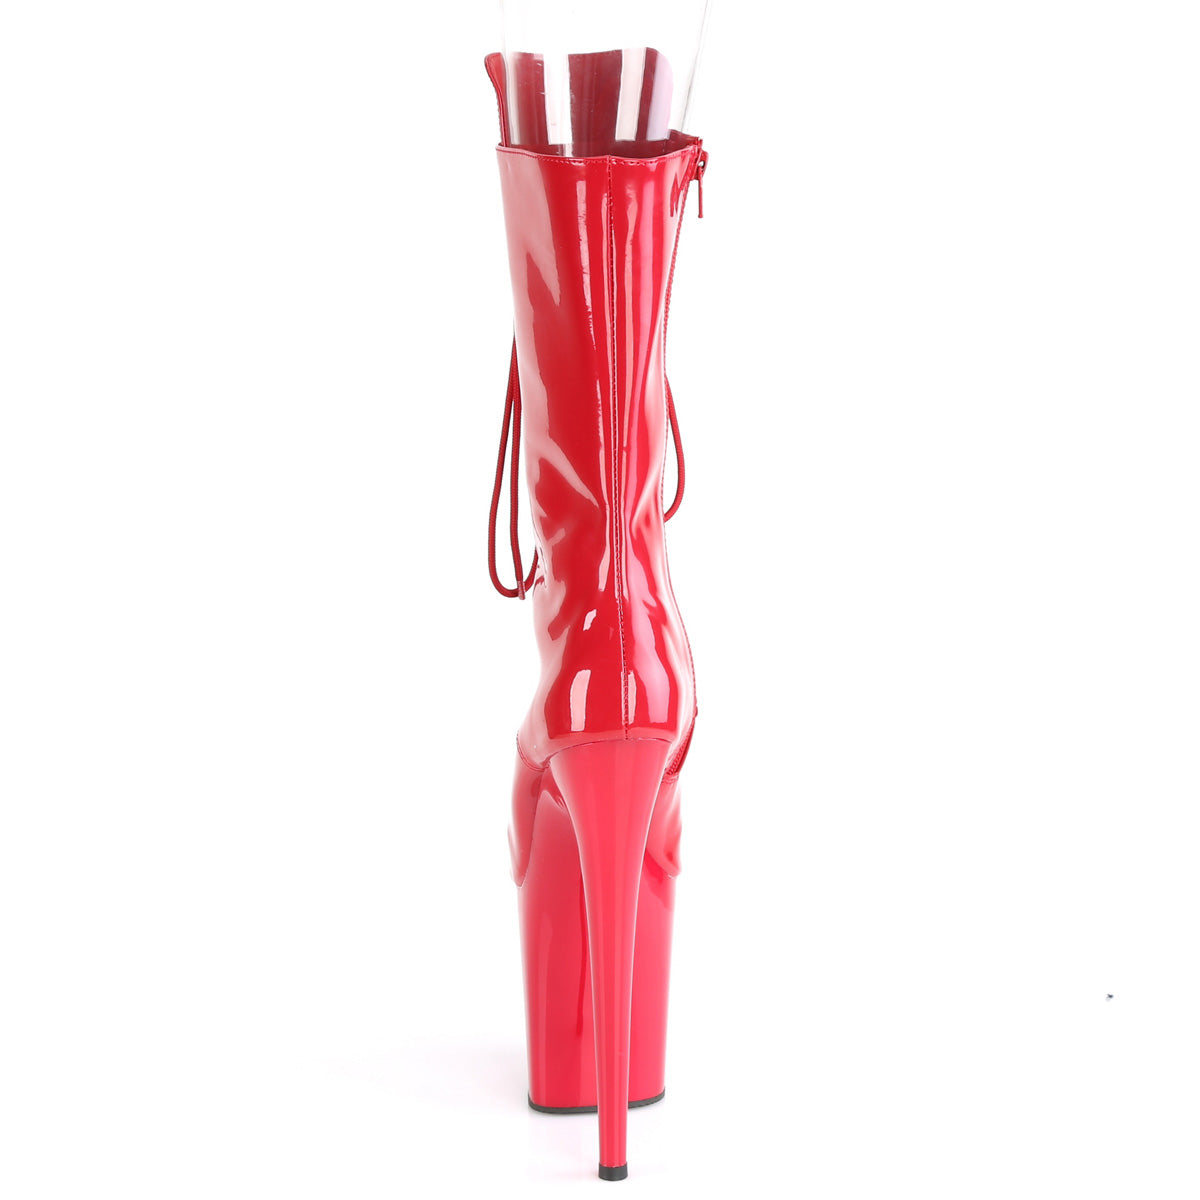 FLAMINGO-1051/R/M 8" PLEASER FAST DELIVERY 24-48h